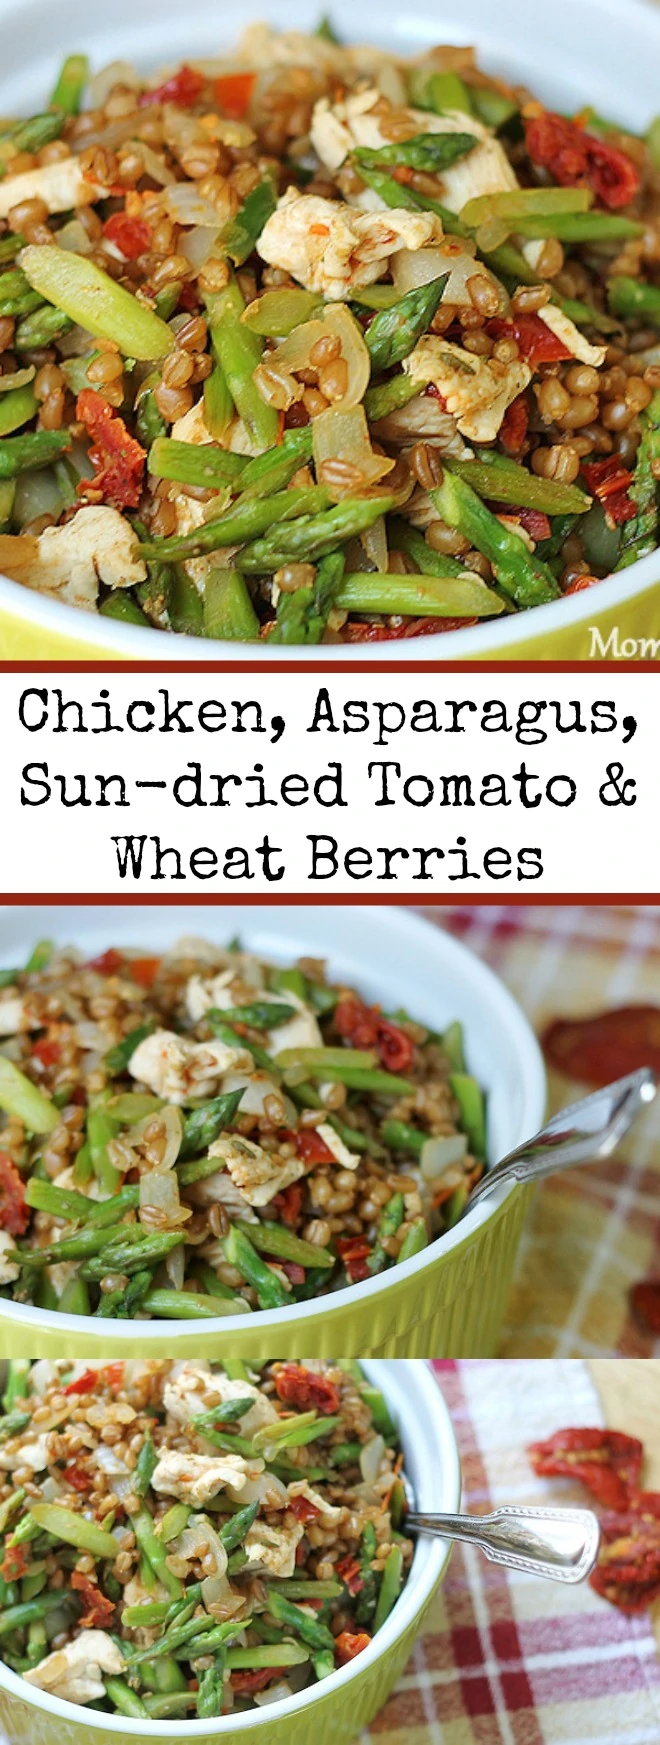 Chicken, Asparagus, Sun-dried Tomato and Wheat Berries